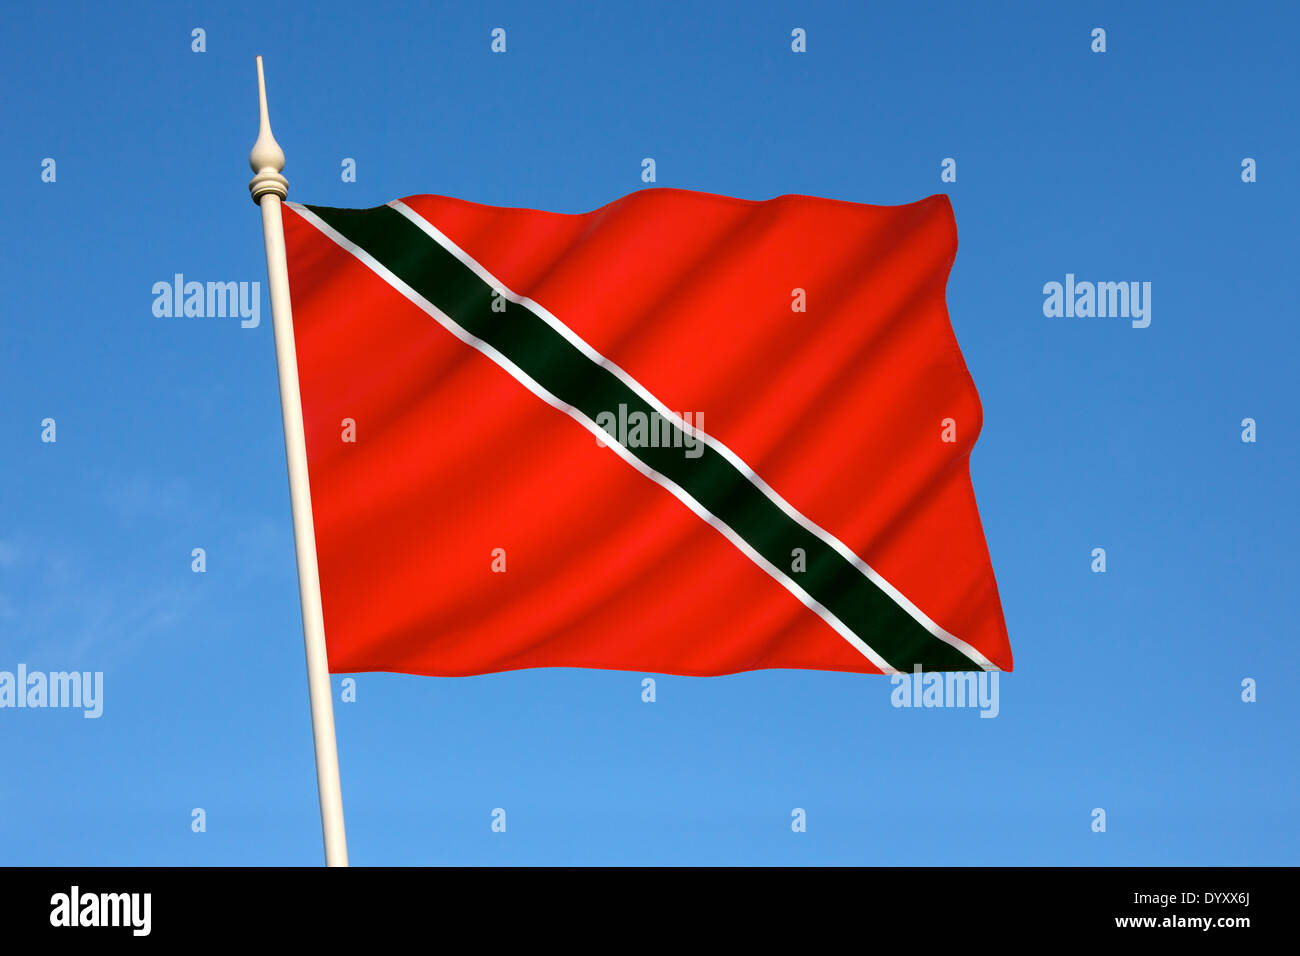 The flag of Trinidad and Tobago Stock Photo